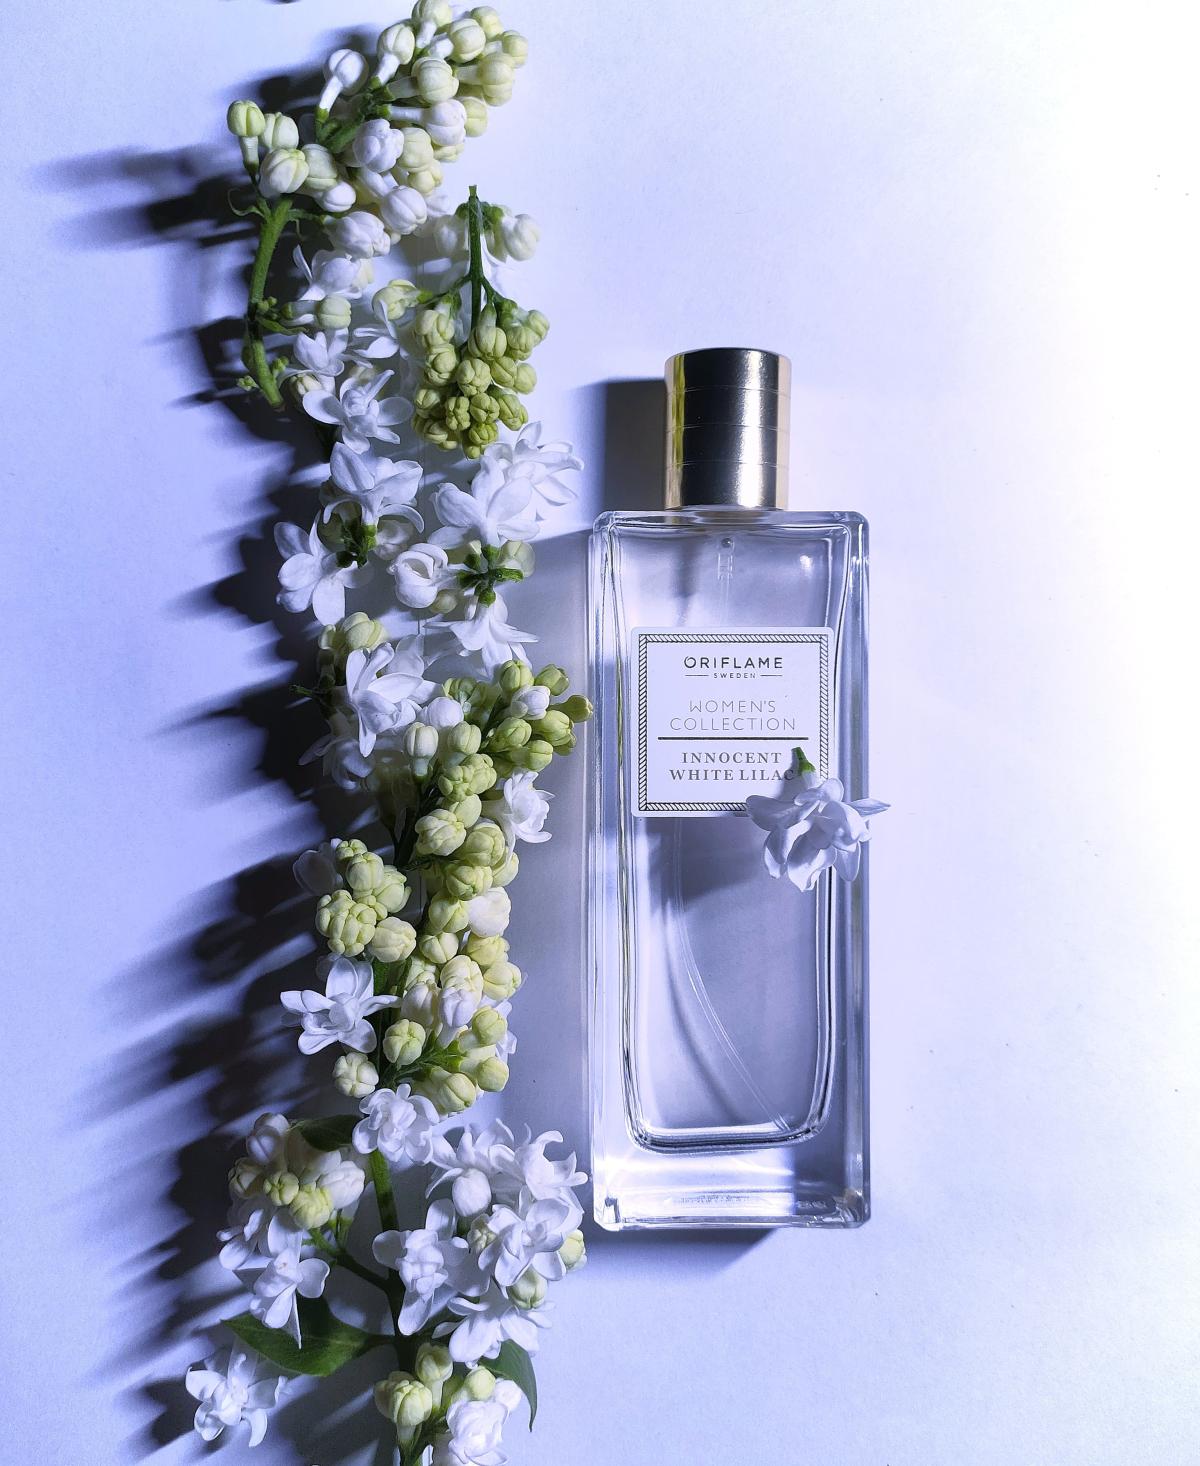 Innocent White Lilac Oriflame perfume - a fragrance for women 2016